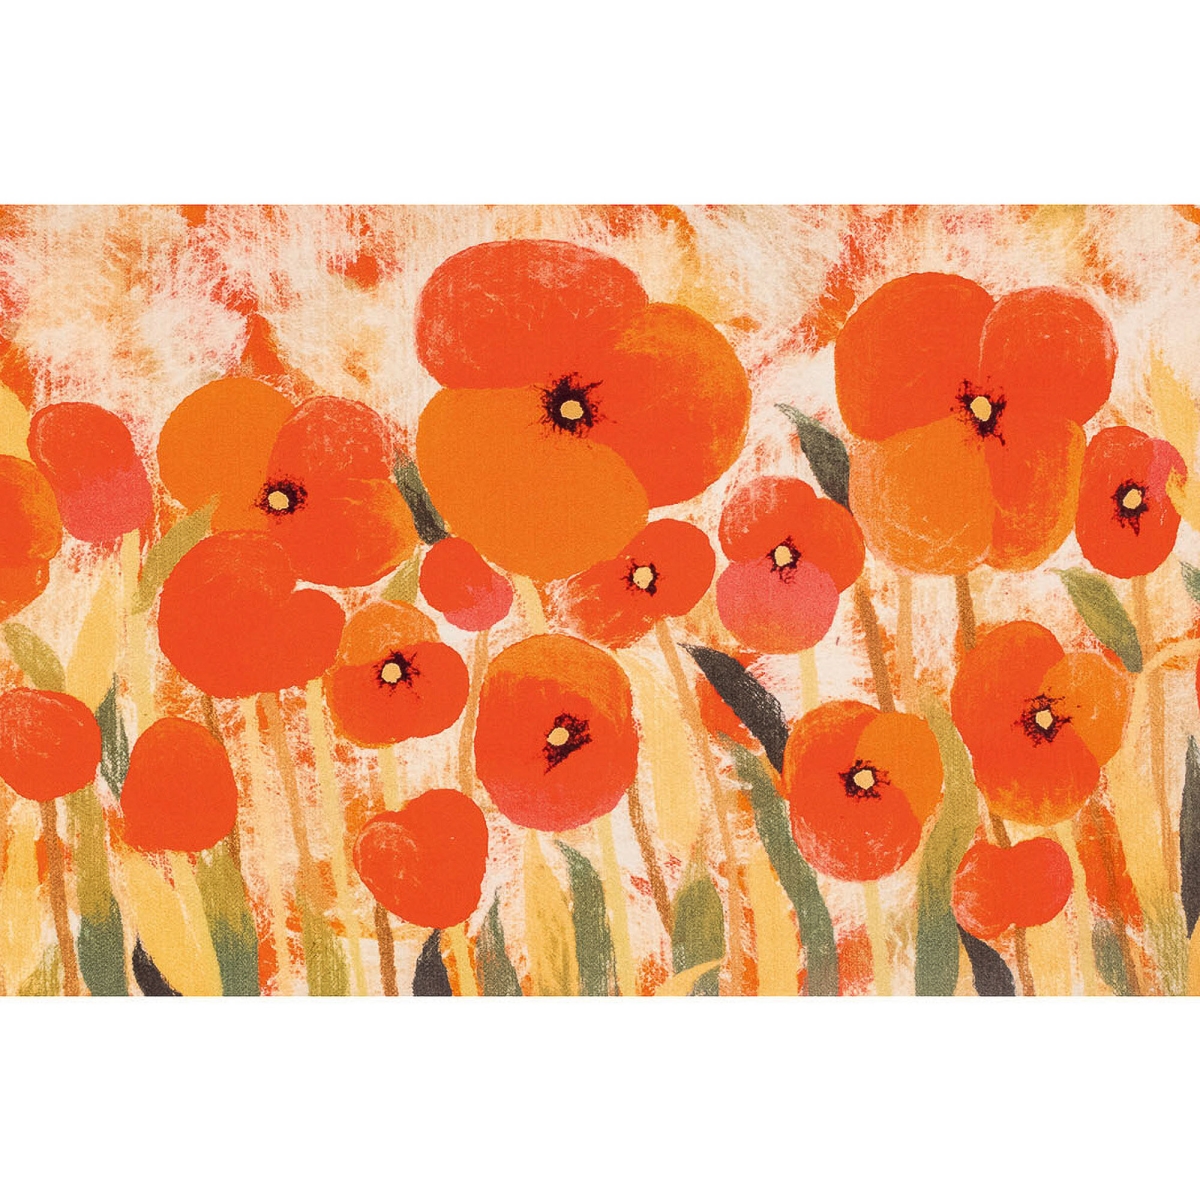 Trans-ocean Imports Ilu23328324 23 X 35 In. Liora Manne Illusions Poppies Indoor & Outdoor Machine Made Mat - Red